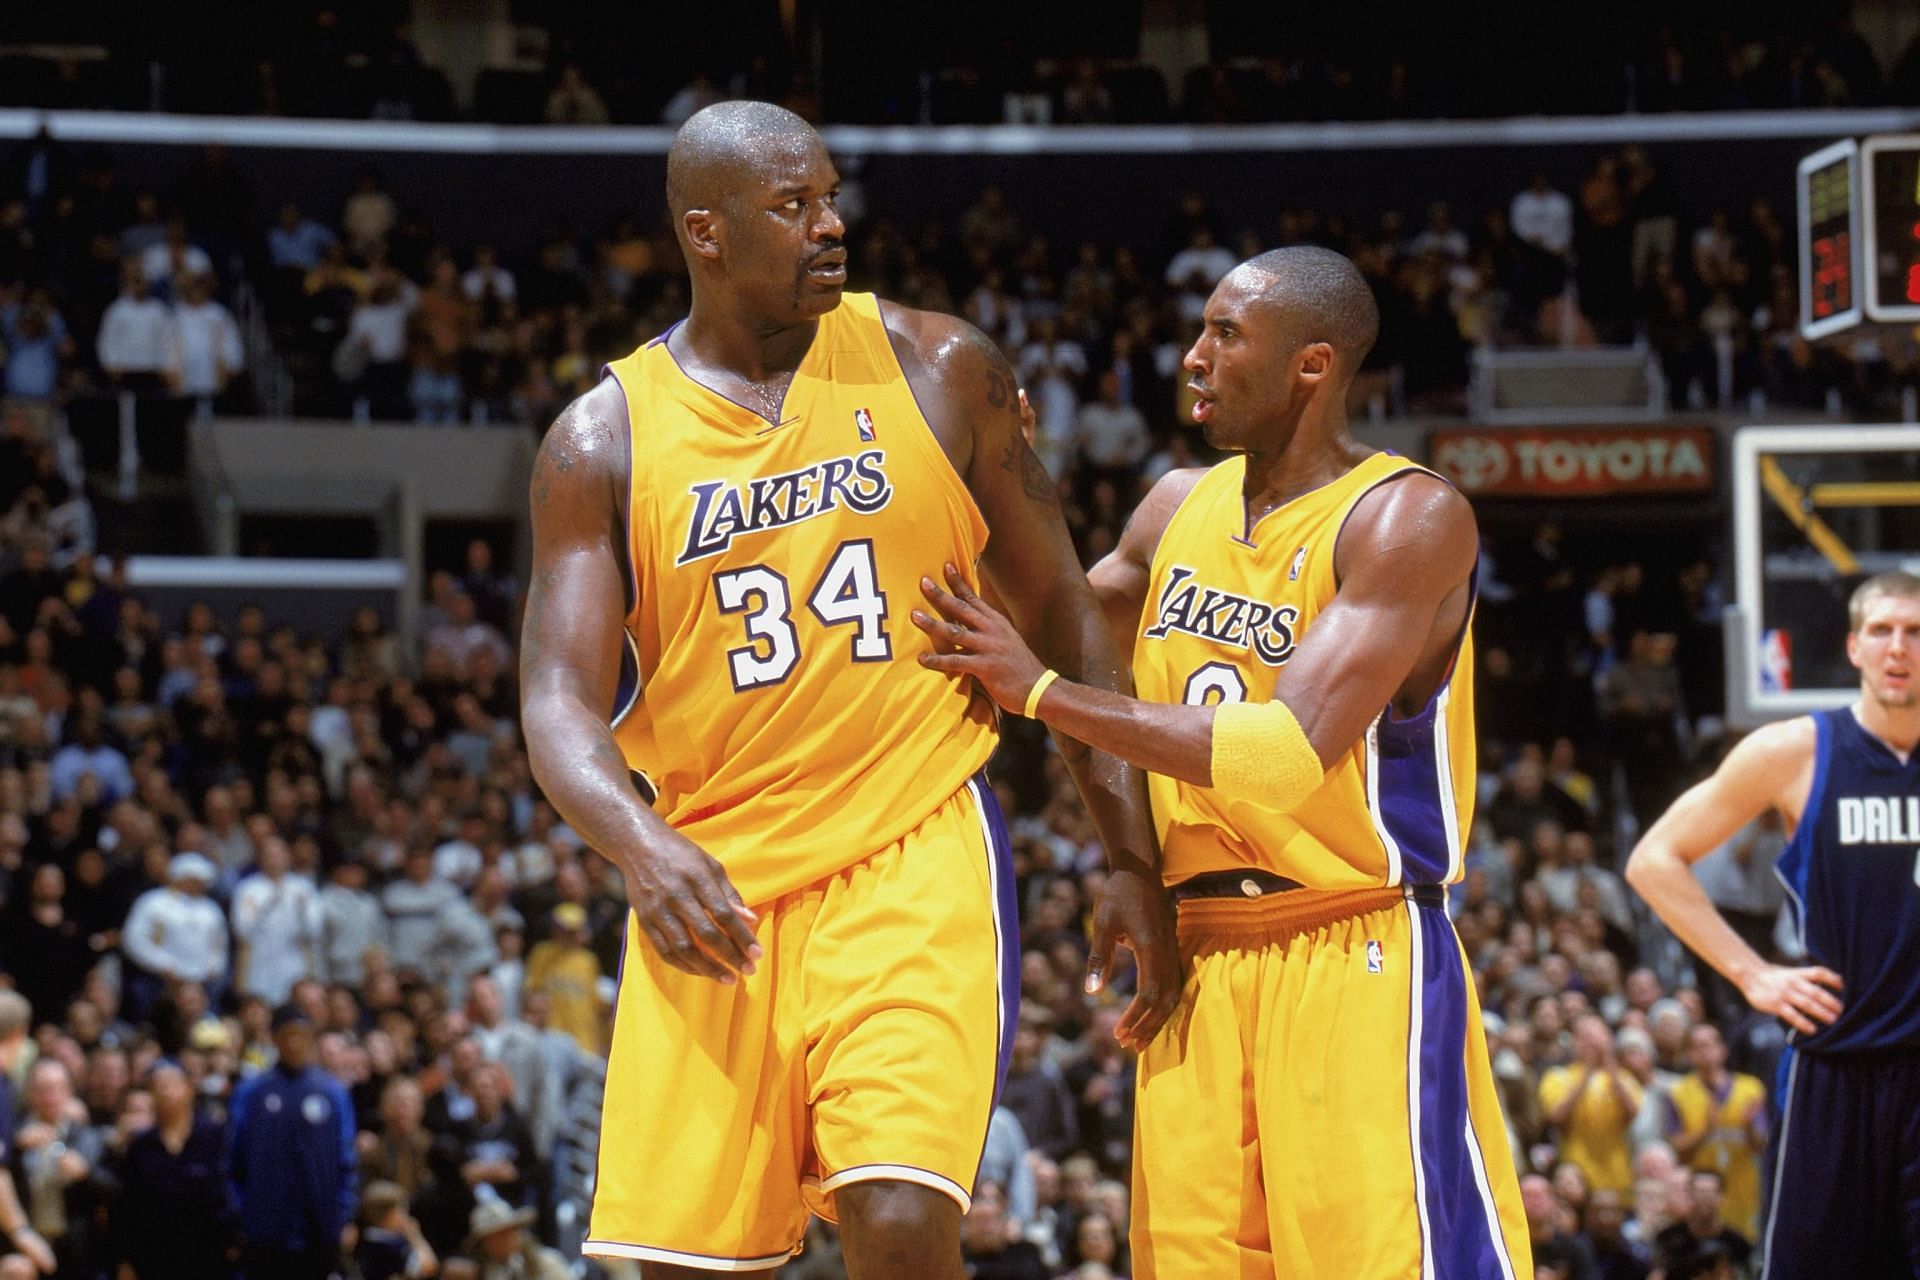 Shaq and Kobe, one of the most dominant duos of all-time in NBA history. [Photo: Bleacher Report]